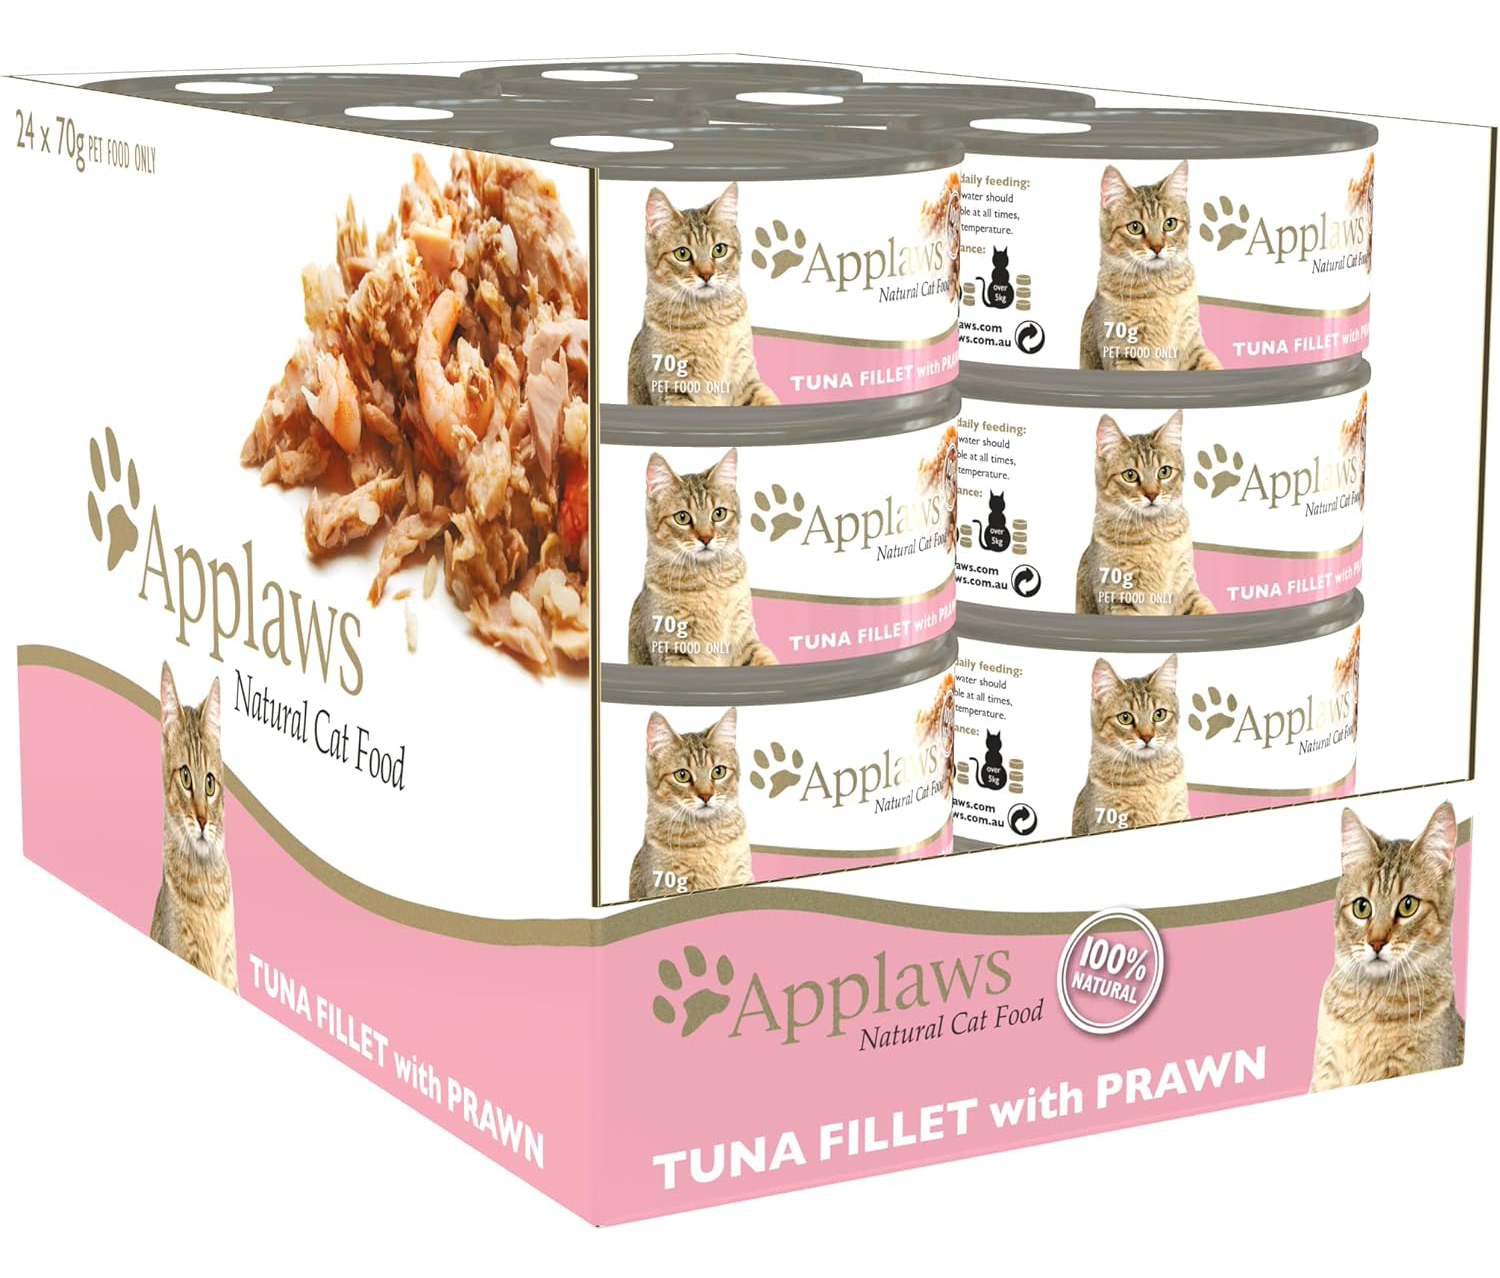 Applaws Tuna and Prawn Natural Wet Cat Food review